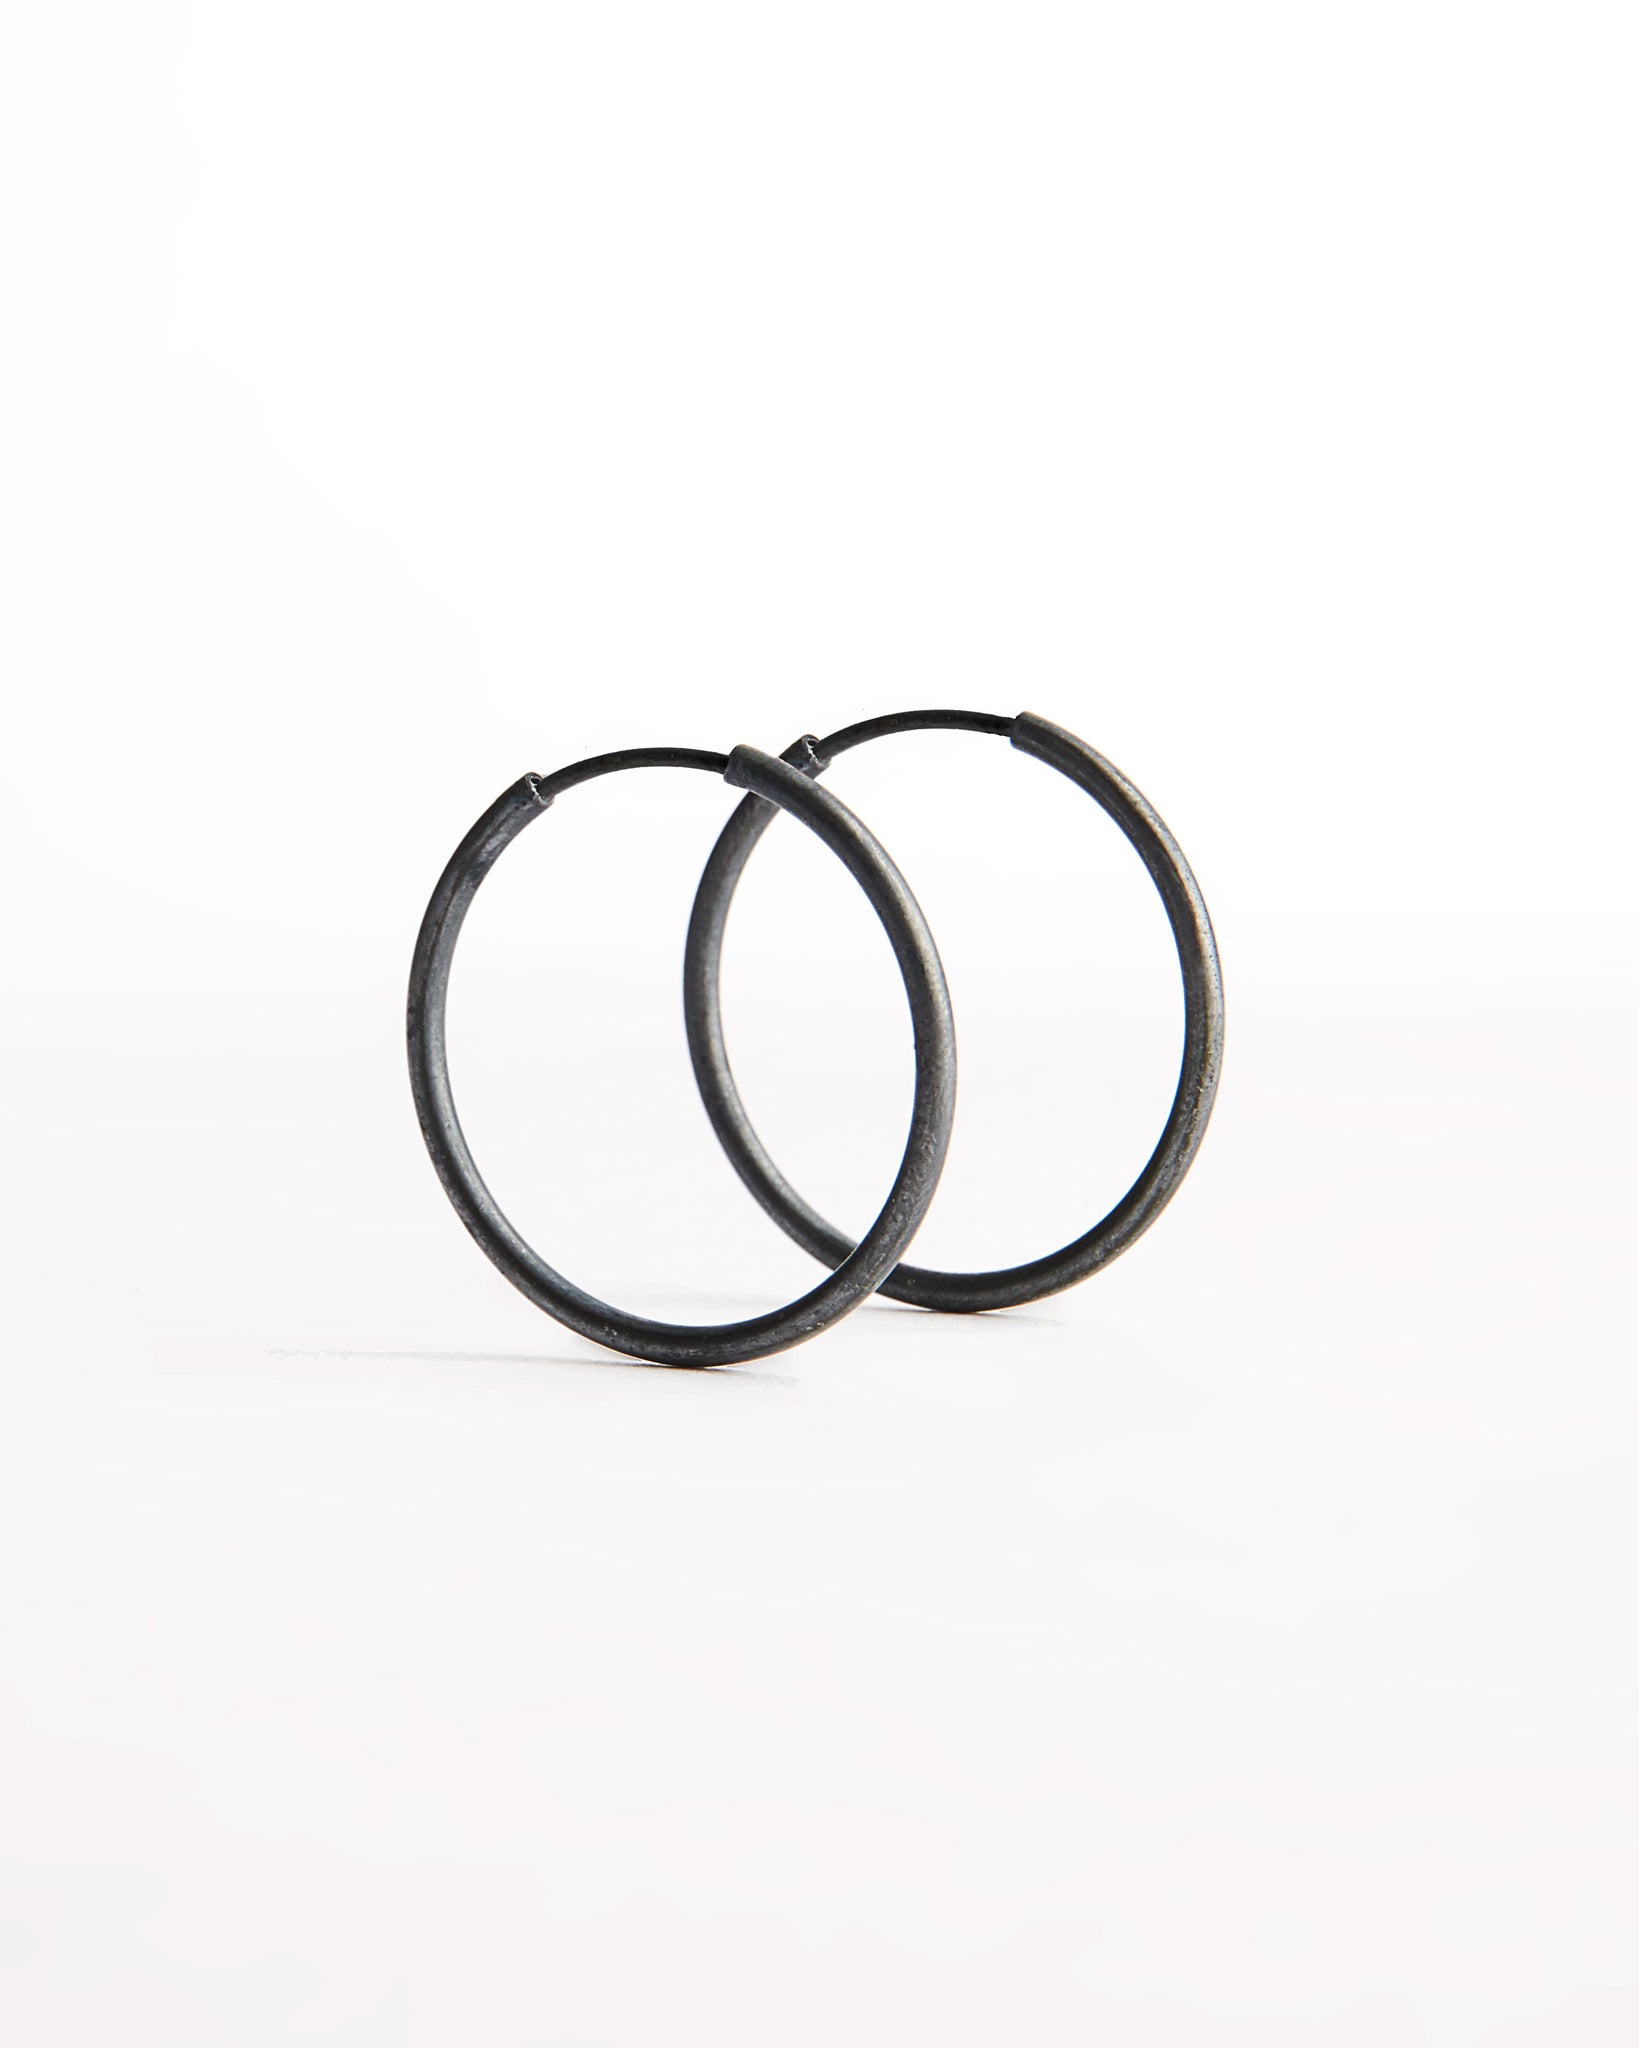 Sample Oxidized Small Hoops